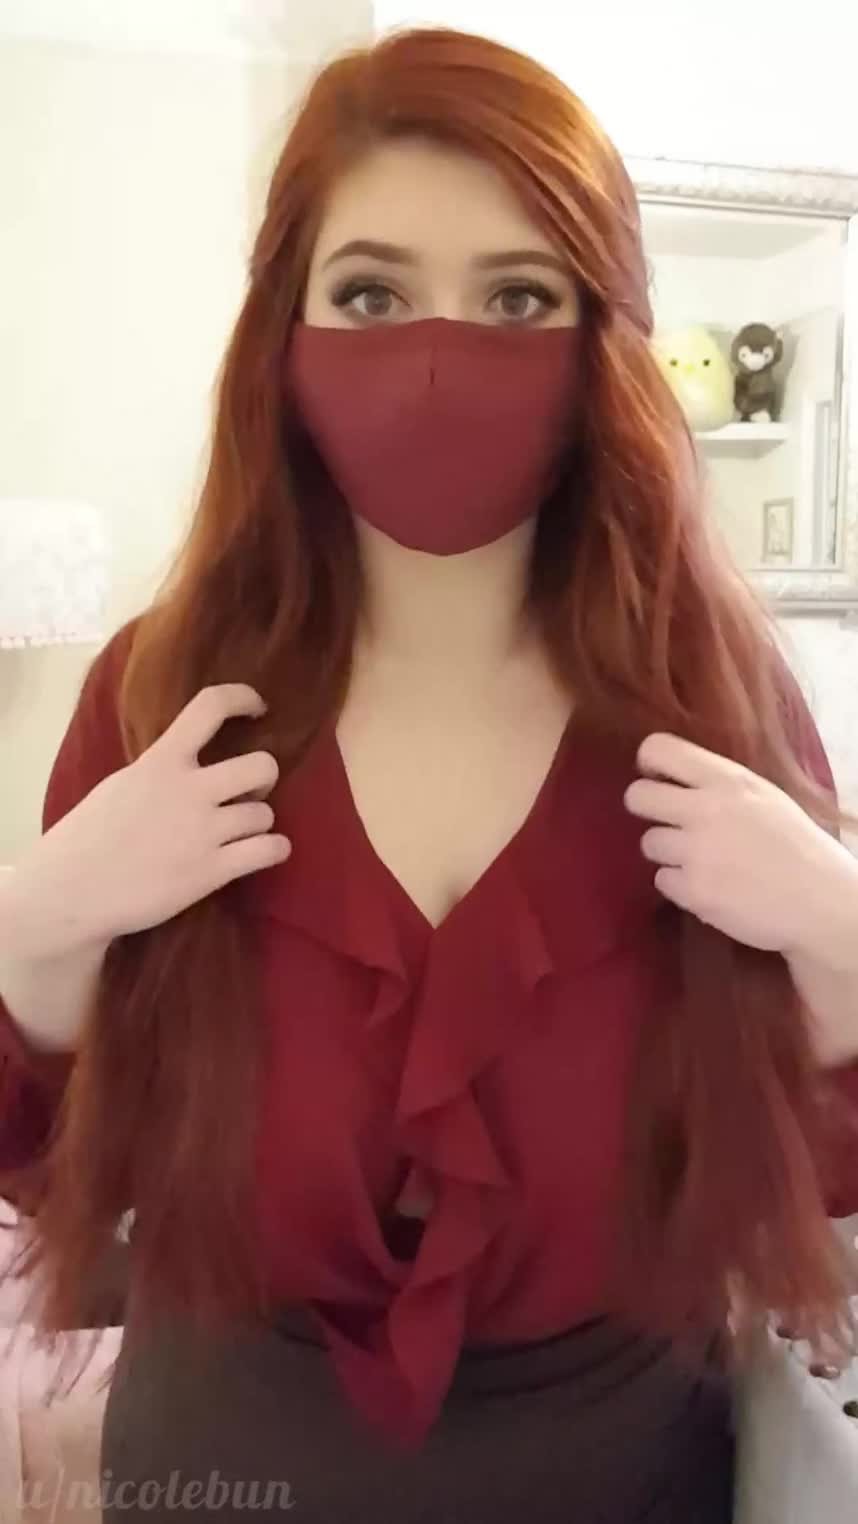 Watch the Video by KatPirateKitten with the username @KatPirateKitten, posted on March 4, 2021. The post is about the topic Boobs, Only Boobs. and the text says 'Sexy'